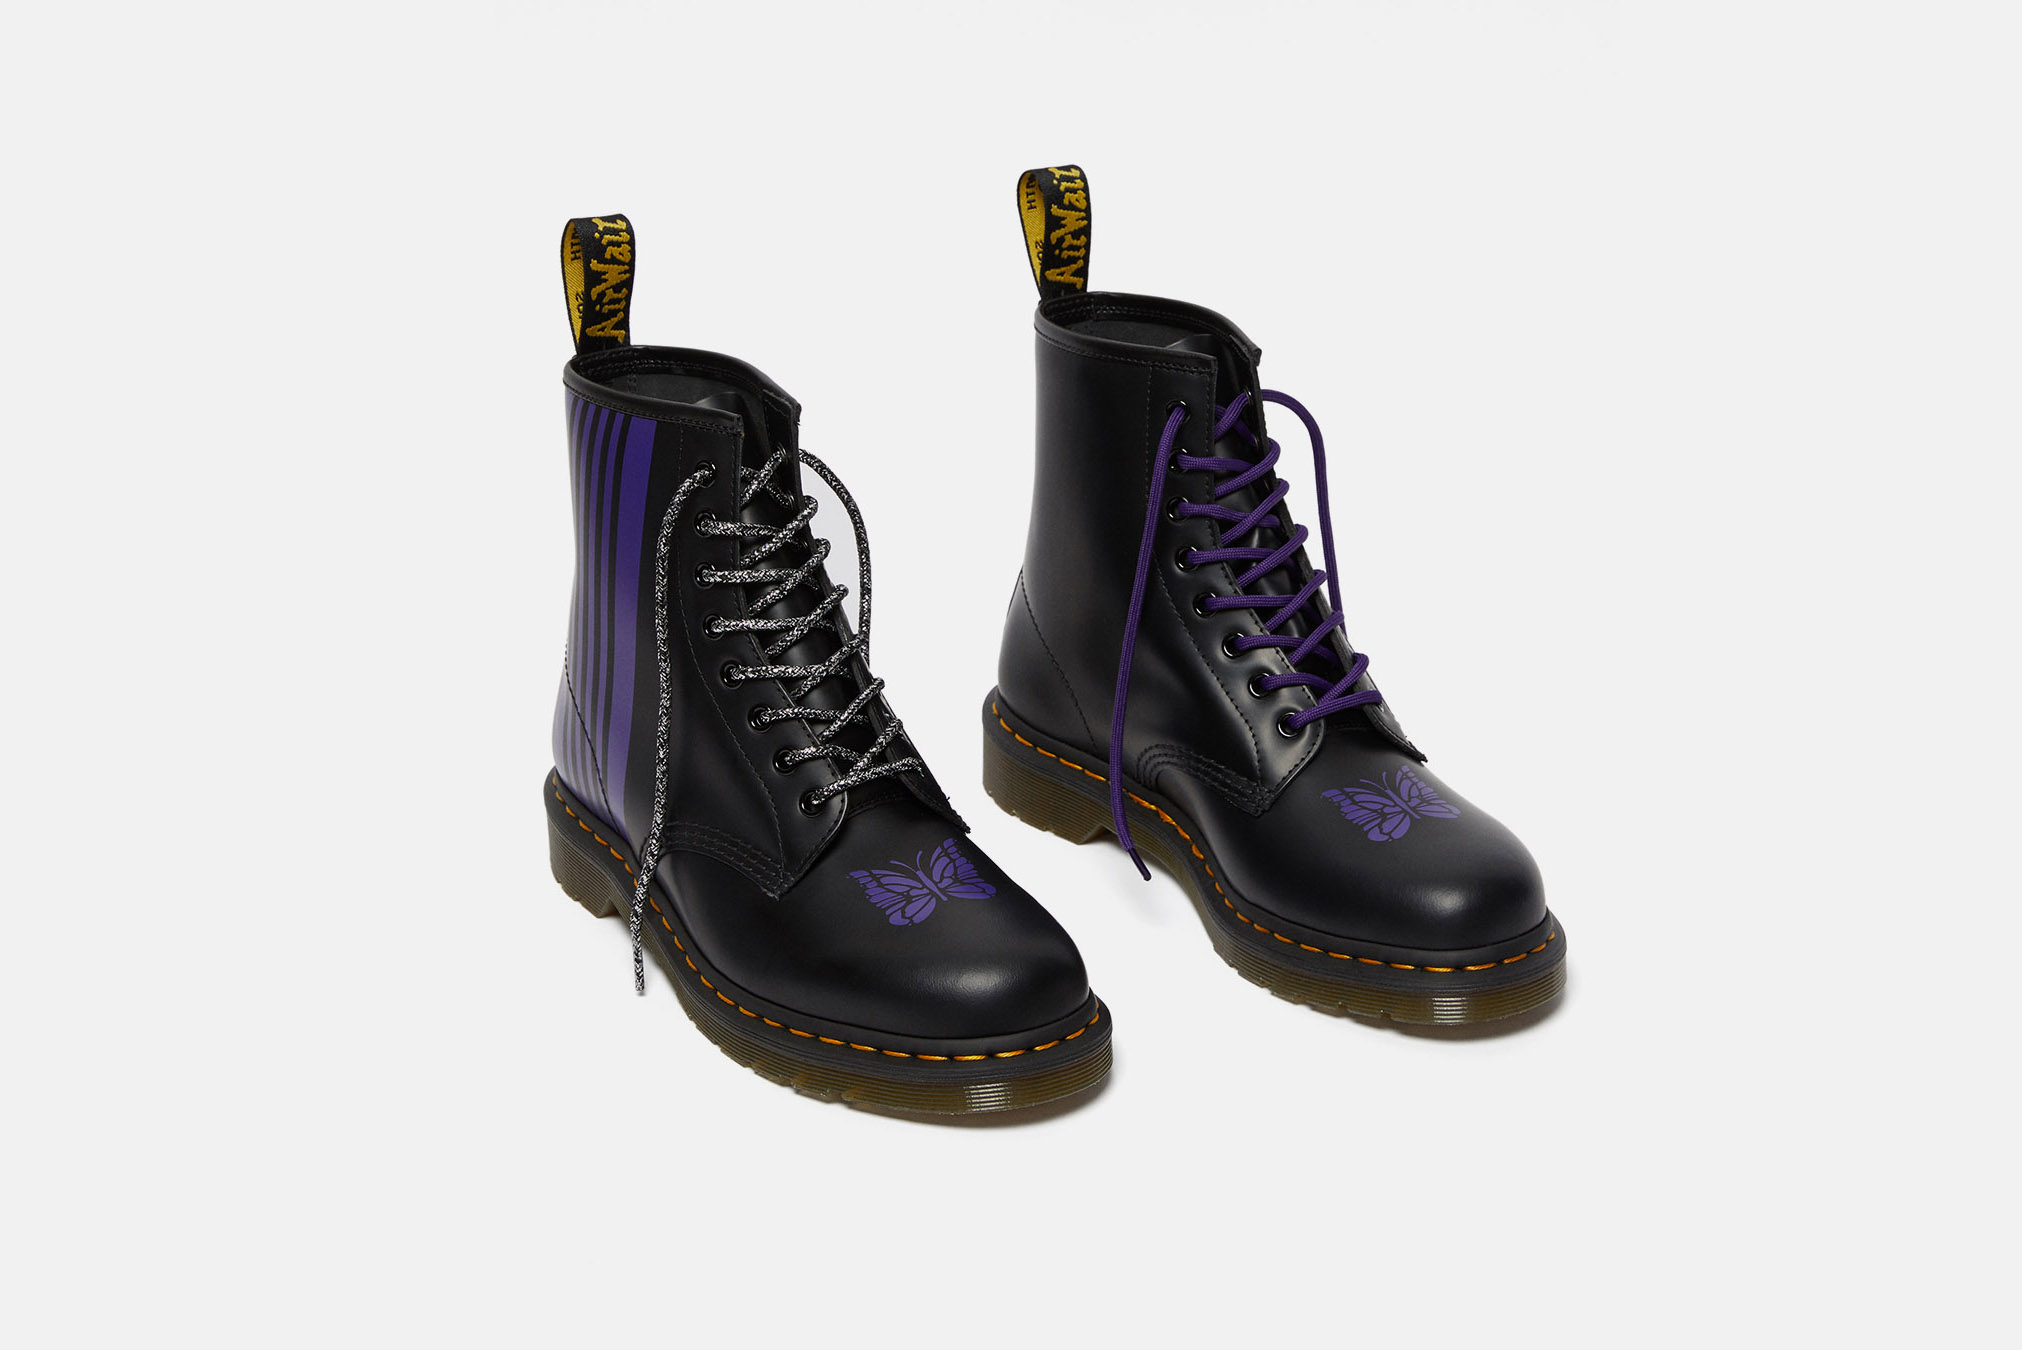 Dr. Martens x Needles 1460 Remastered Boot - Register Now on